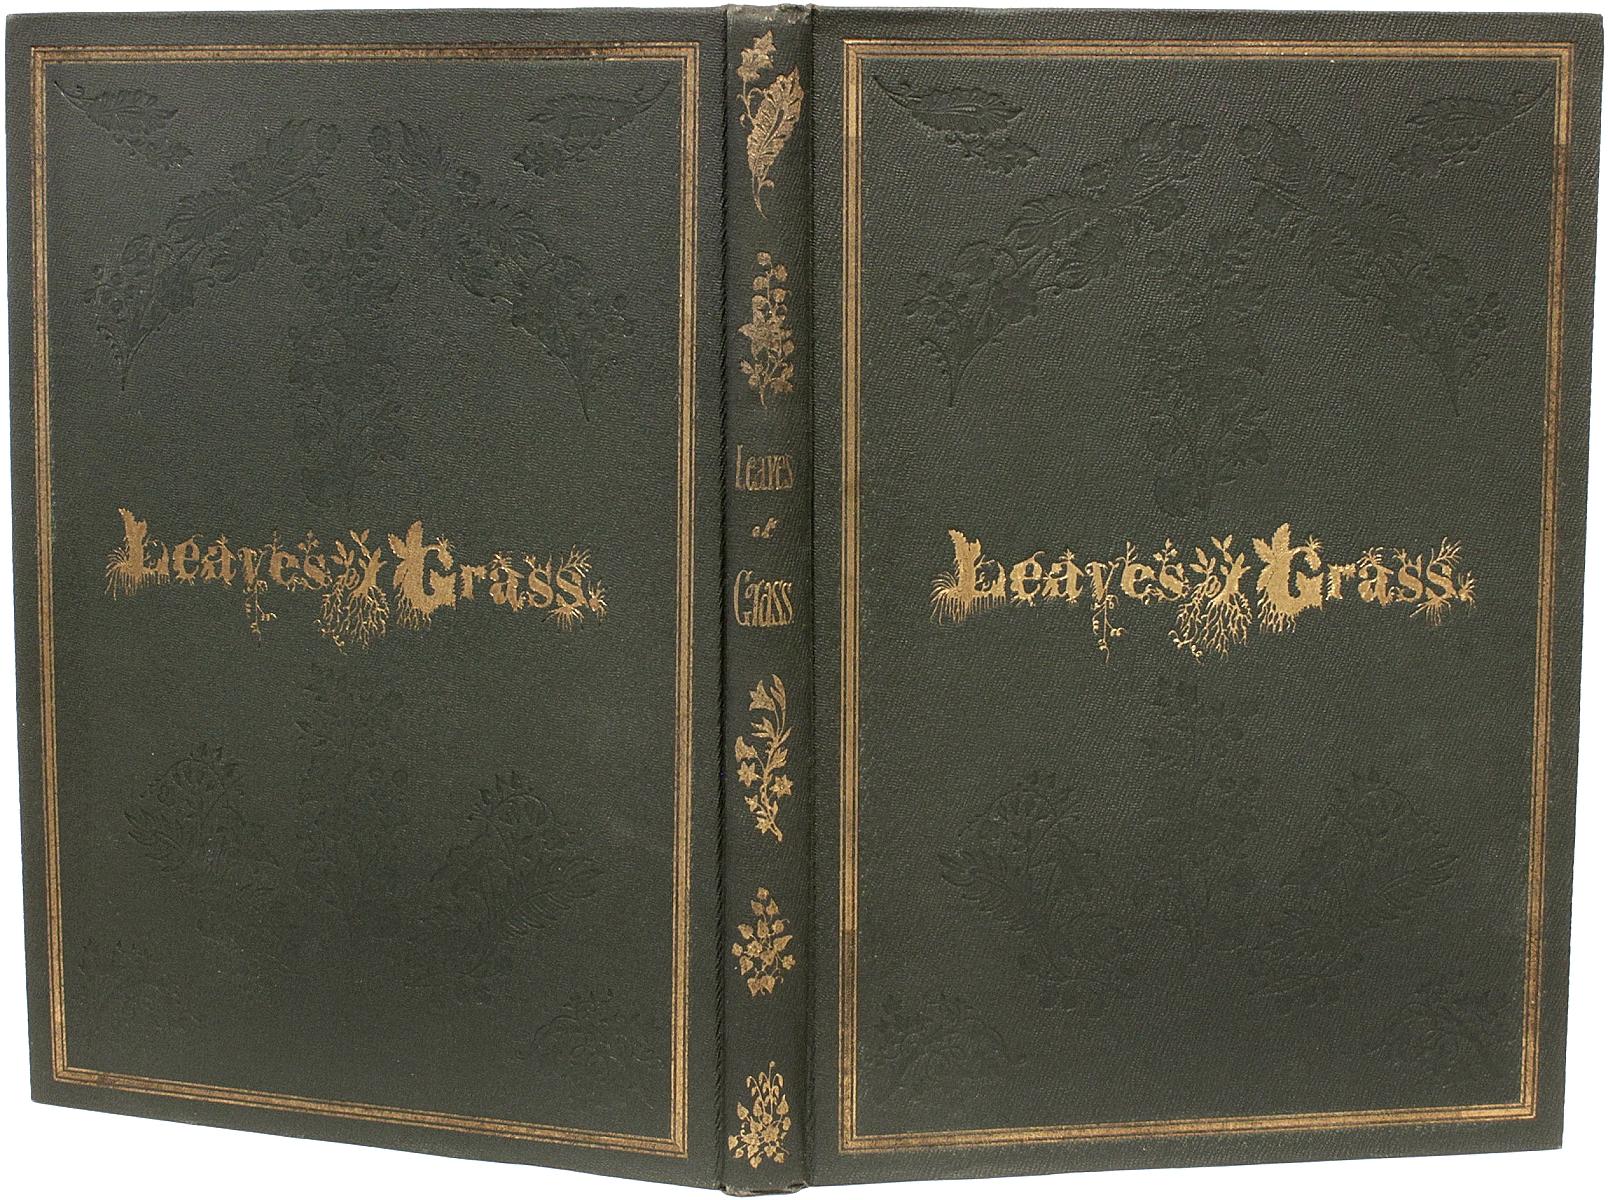 AUTHOR: WHITMAN, Walt. 

TITLE: Leaves of Grass. Facsimile Edition of 1855 Text. 

PUBLISHER: Portland Maine: Thomas Bird Mosher, 1919.

DESCRIPTION: 1 vol., 1 of 250 copies. original dark olive green cloth with gilt stamped triple rule frame